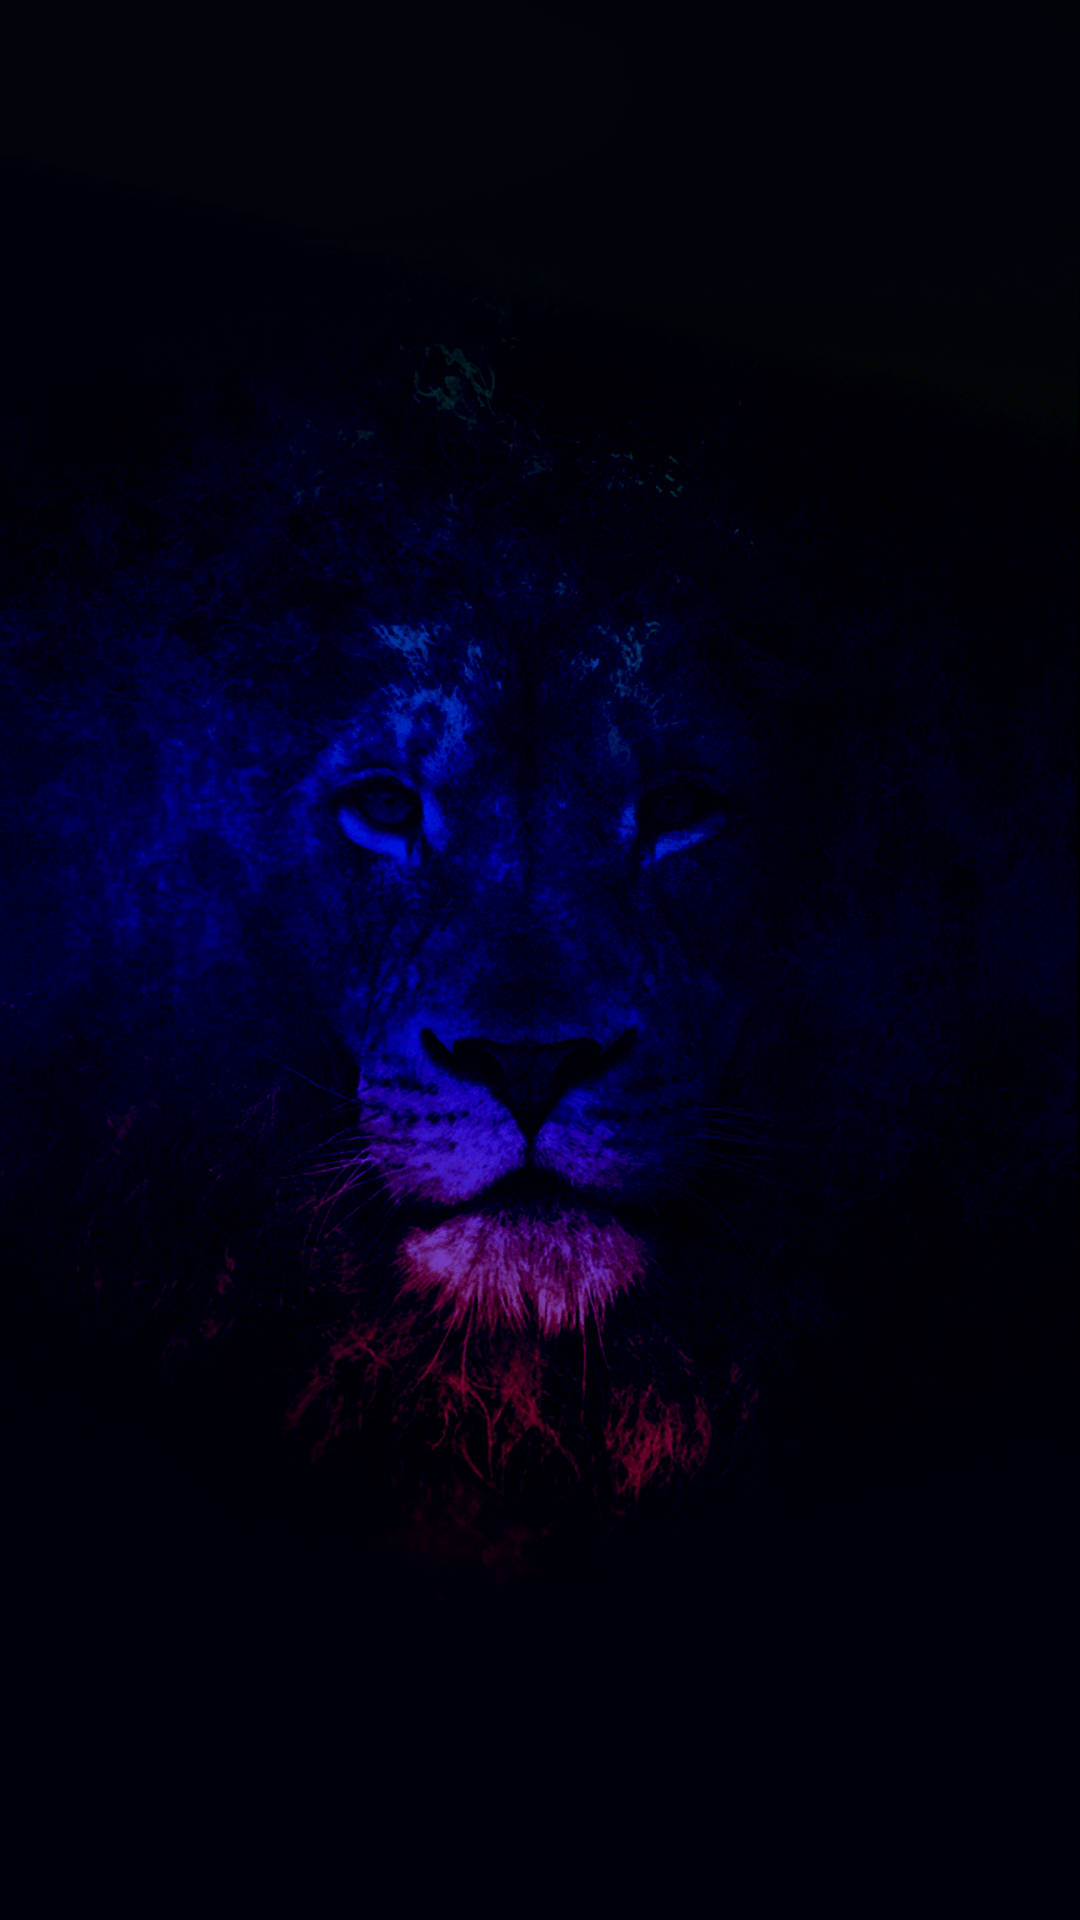 Blue Glowing Lion Animated  Animated backgrounds wallpaper for Pc   Mobiles 1080p  YouTube